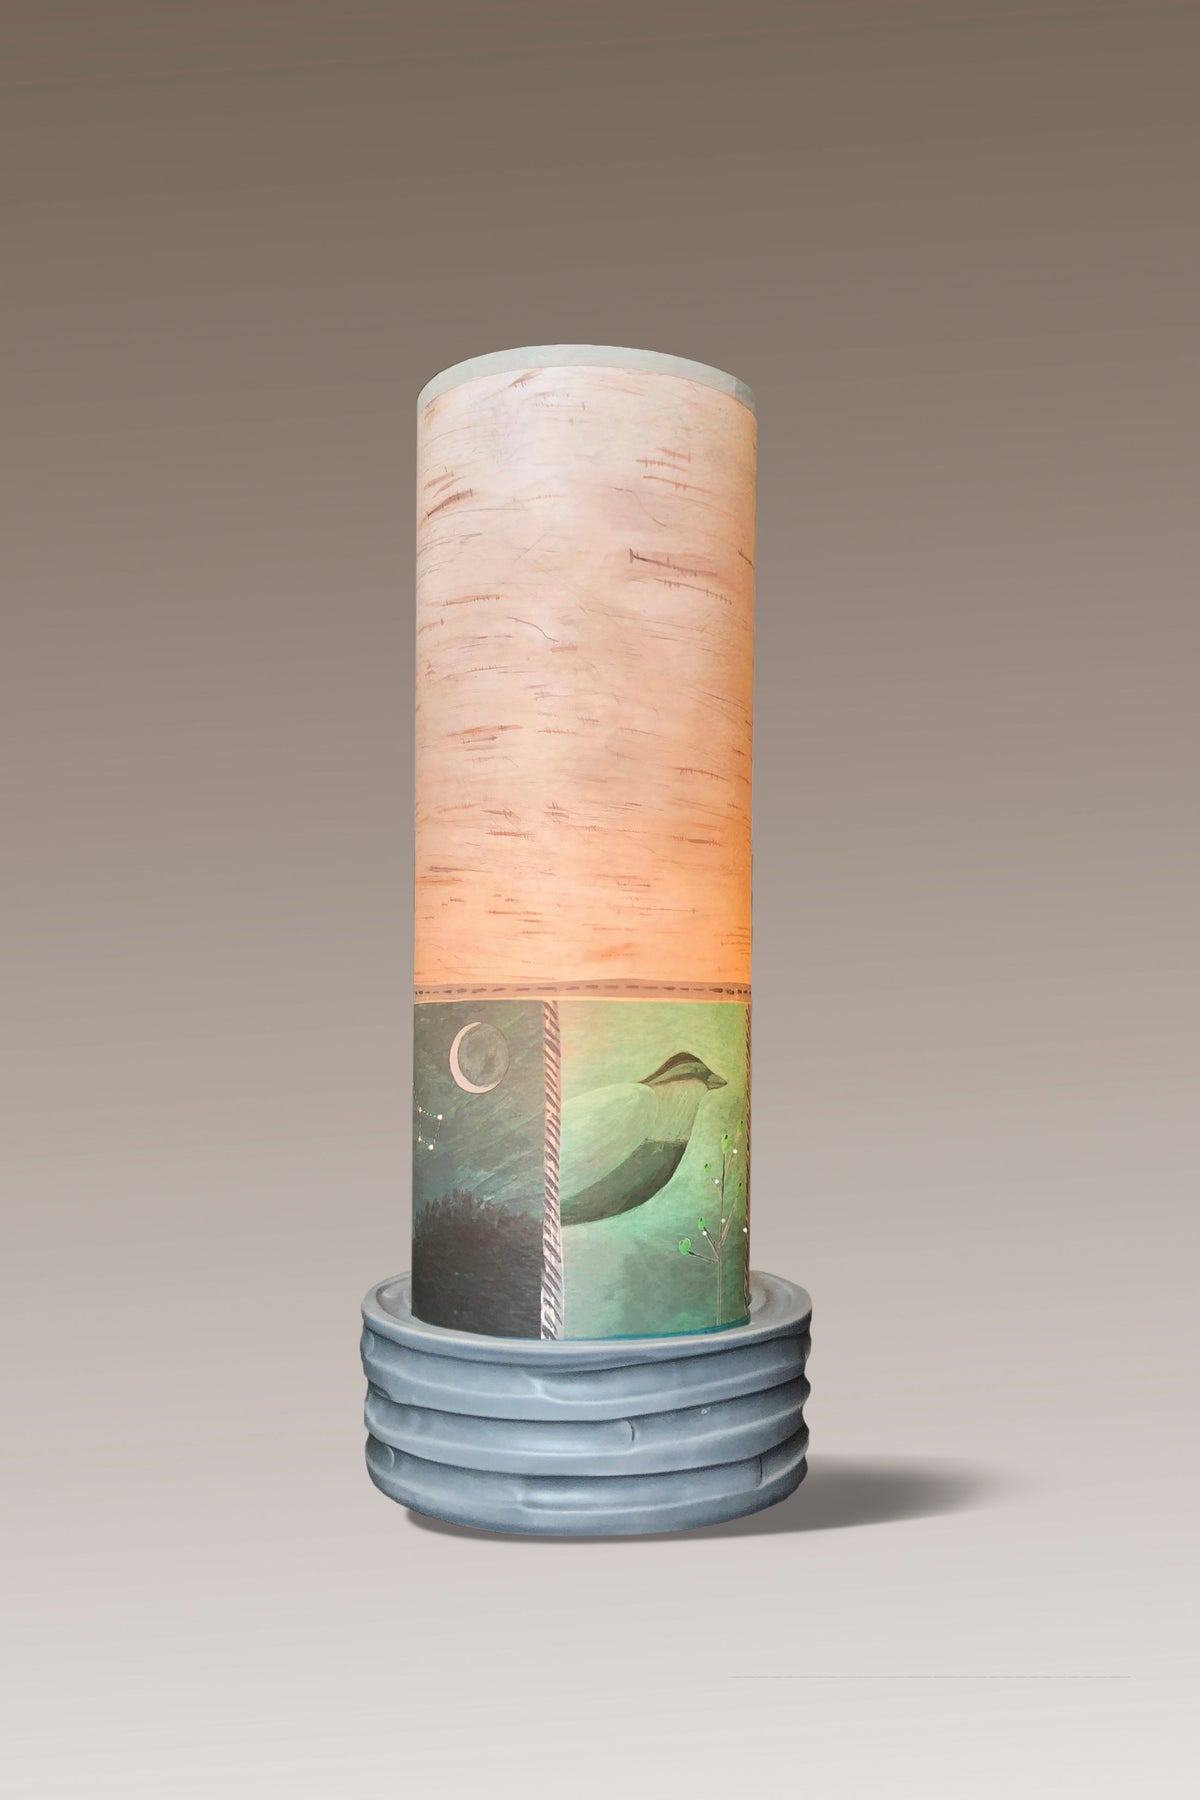 Janna Ugone &amp; Co Luminaires Dove Gray Ceramic Luminaire Accent Lamp with Woodland Trails in Birch Shade